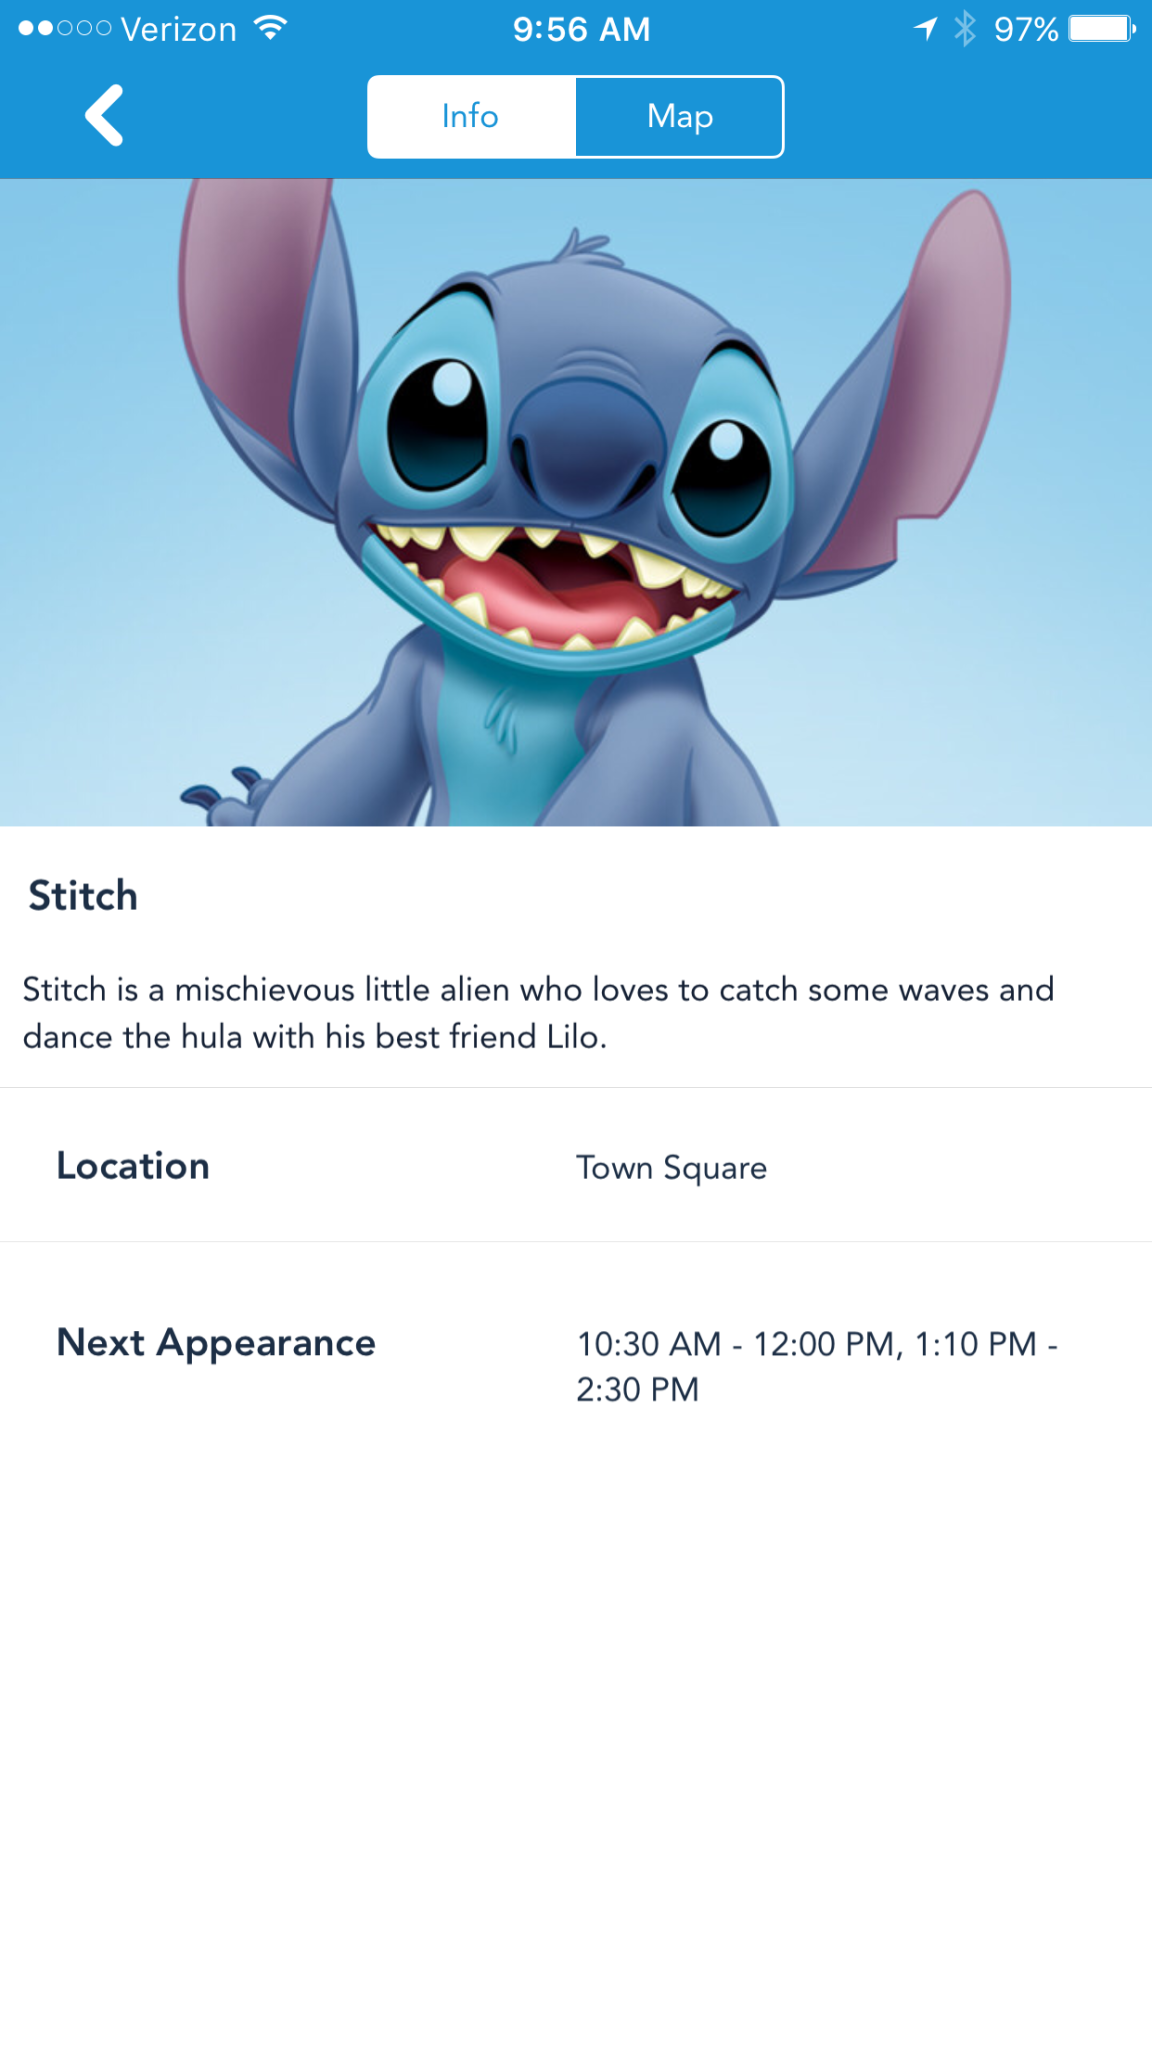 Stitch is Now Appearing in the Magic Kingdom